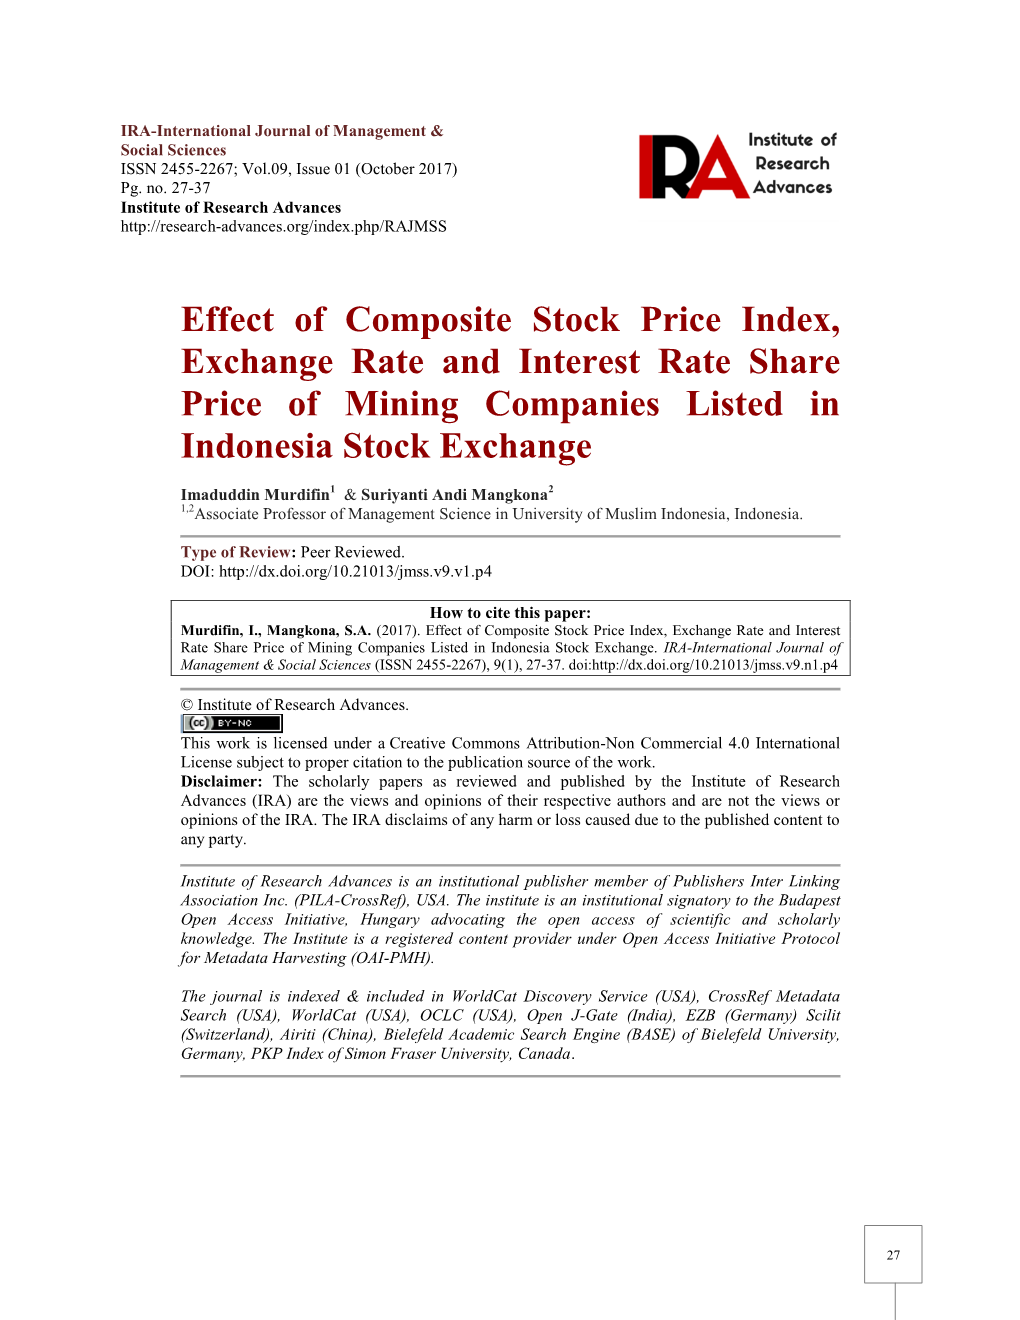 Effect of Composite Stock Price Index, Exchange Rate and Interest Rate Share Price of Mining Companies Listed in Indonesia Stock Exchange